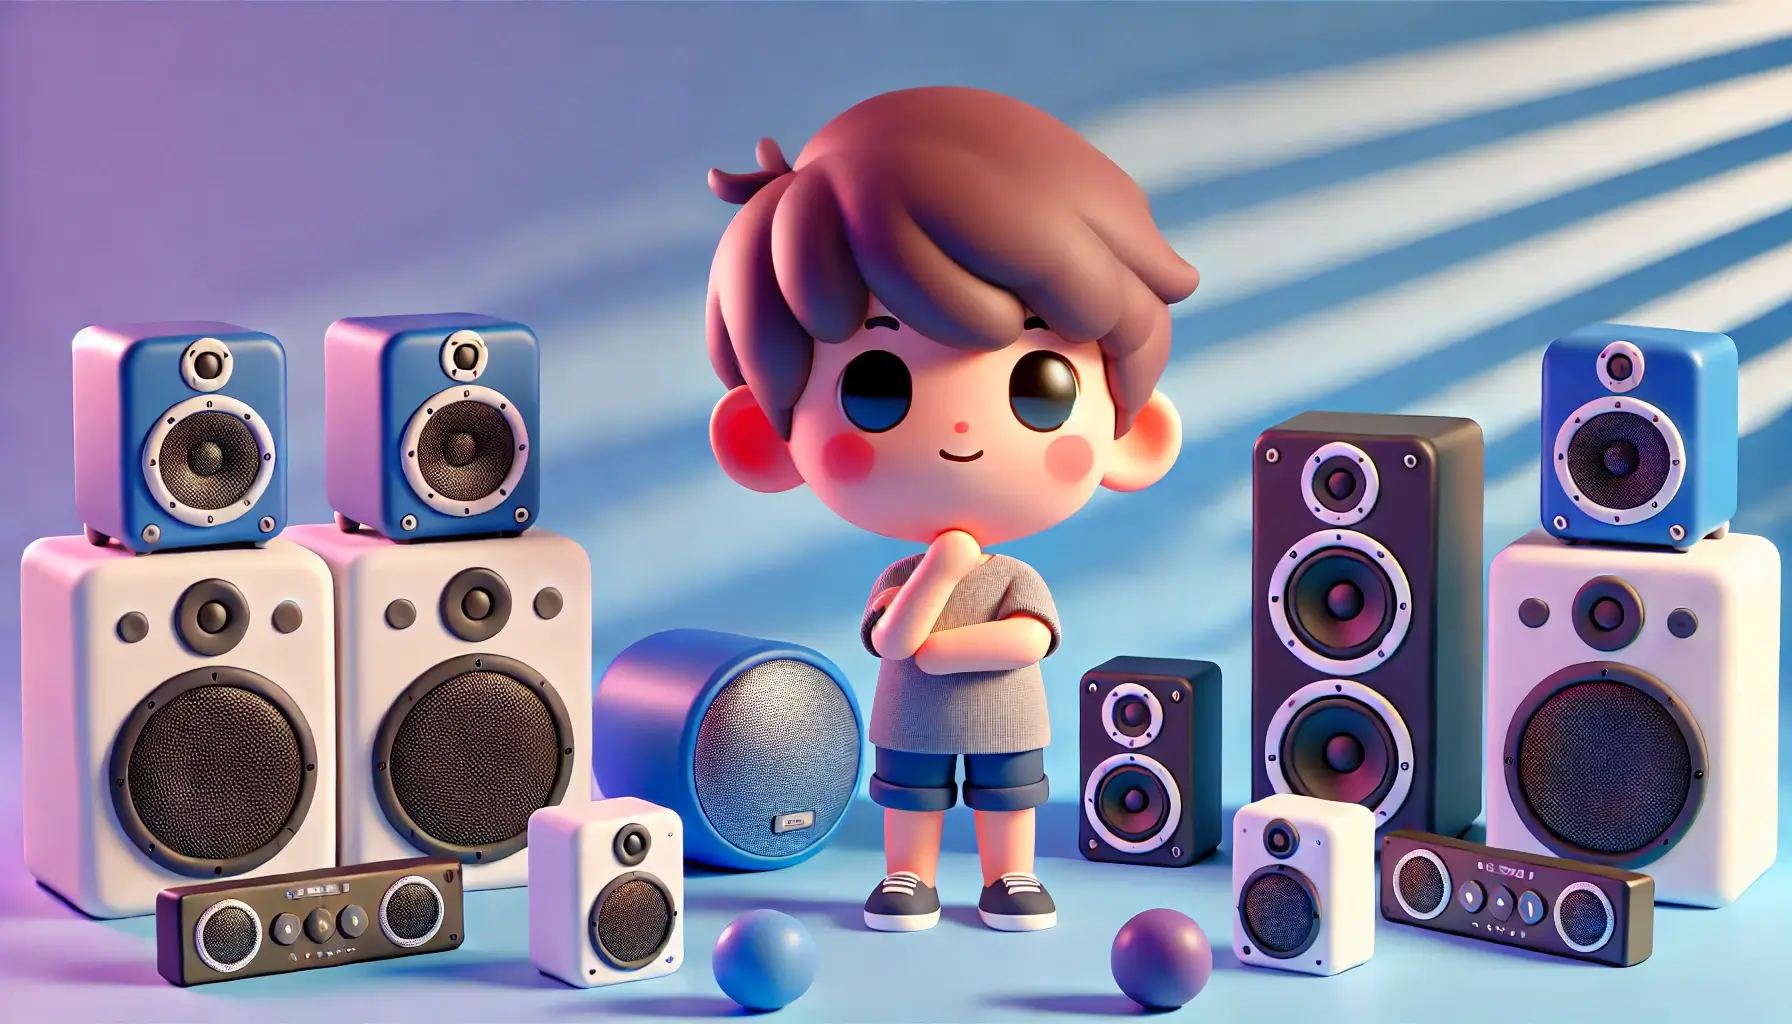 A boy thinking between many speakers while choosing the right speaker